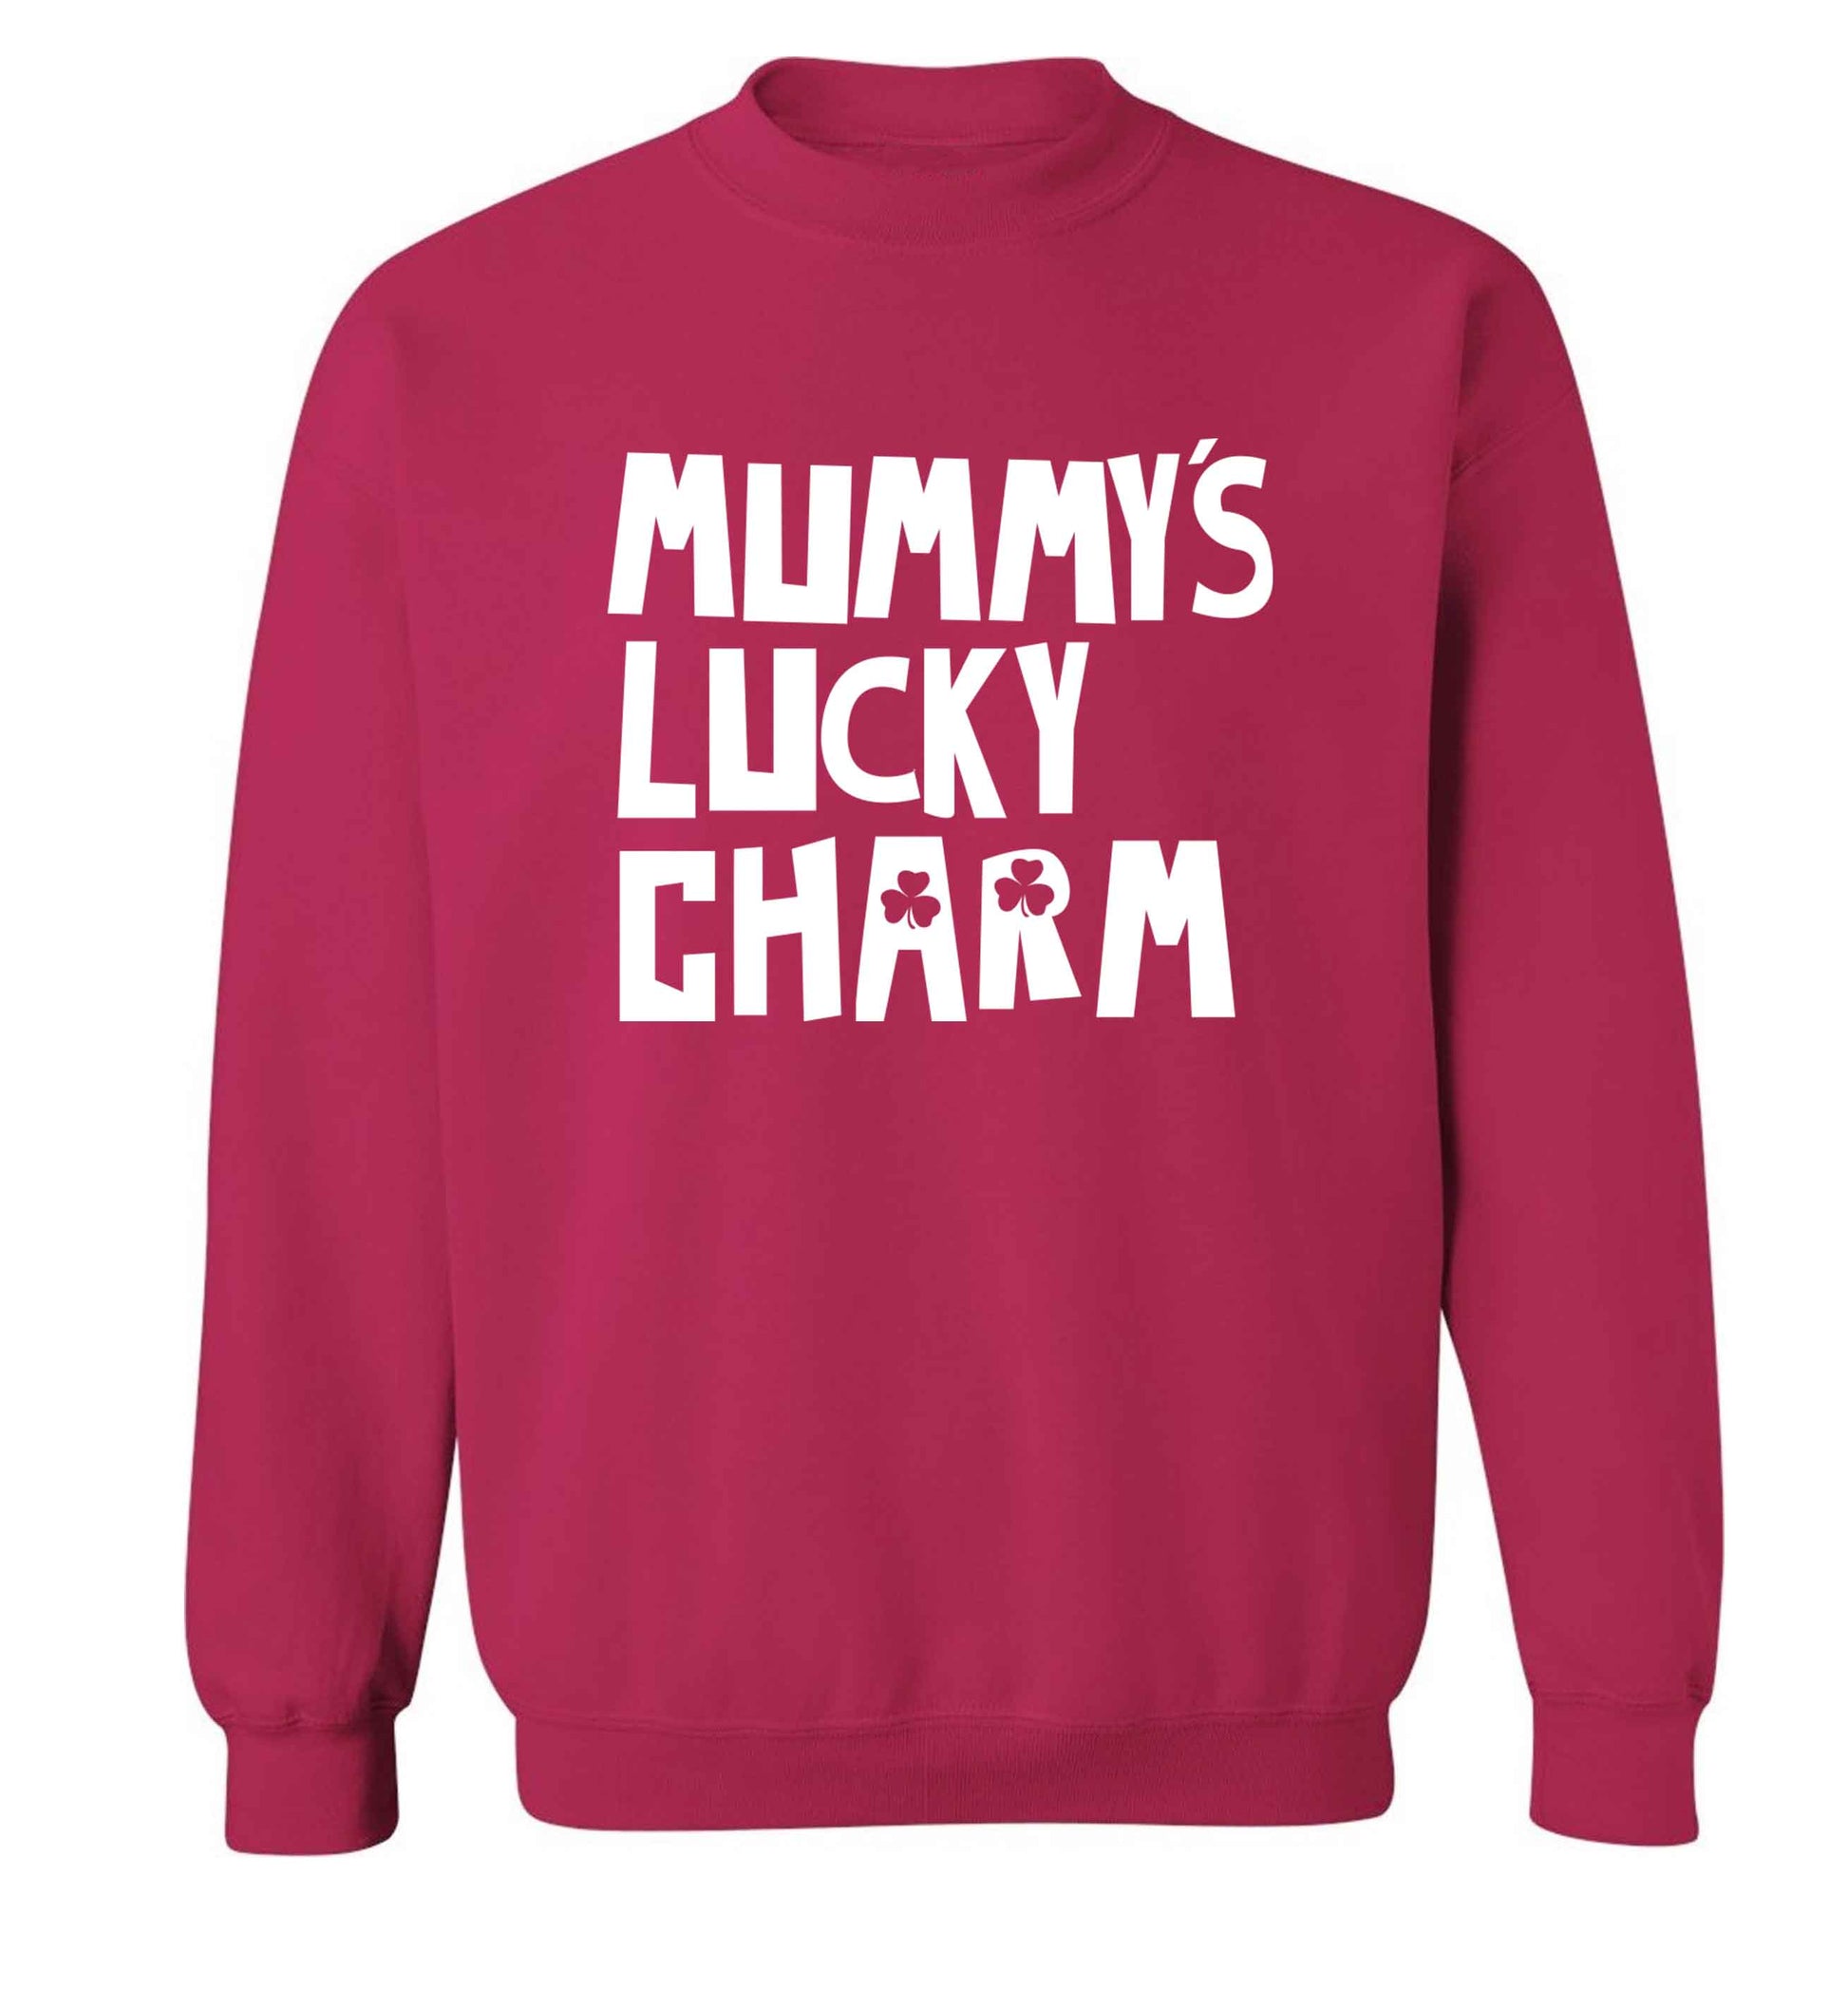 Mummy's lucky charm adult's unisex pink sweater 2XL